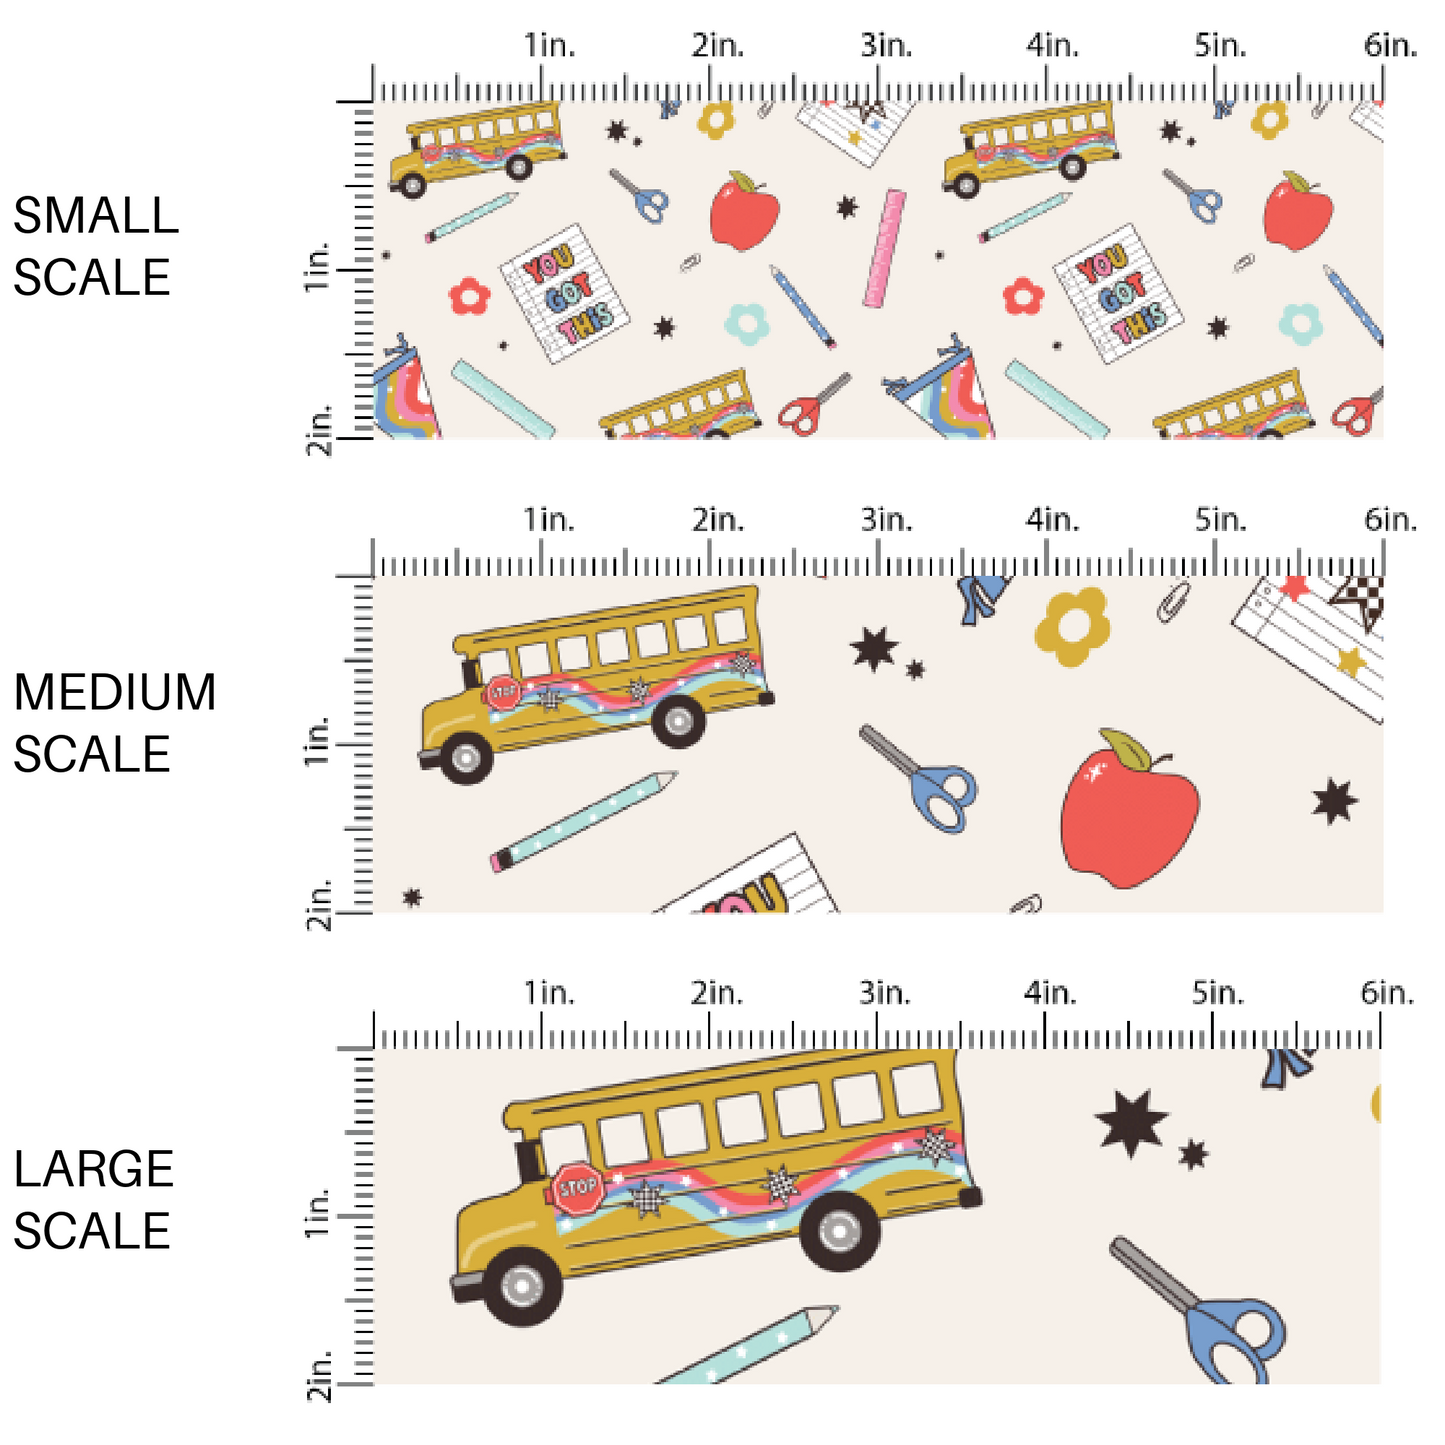 Cream fabric by the yard scaled image guide with school buses, school supplies, and flowers.